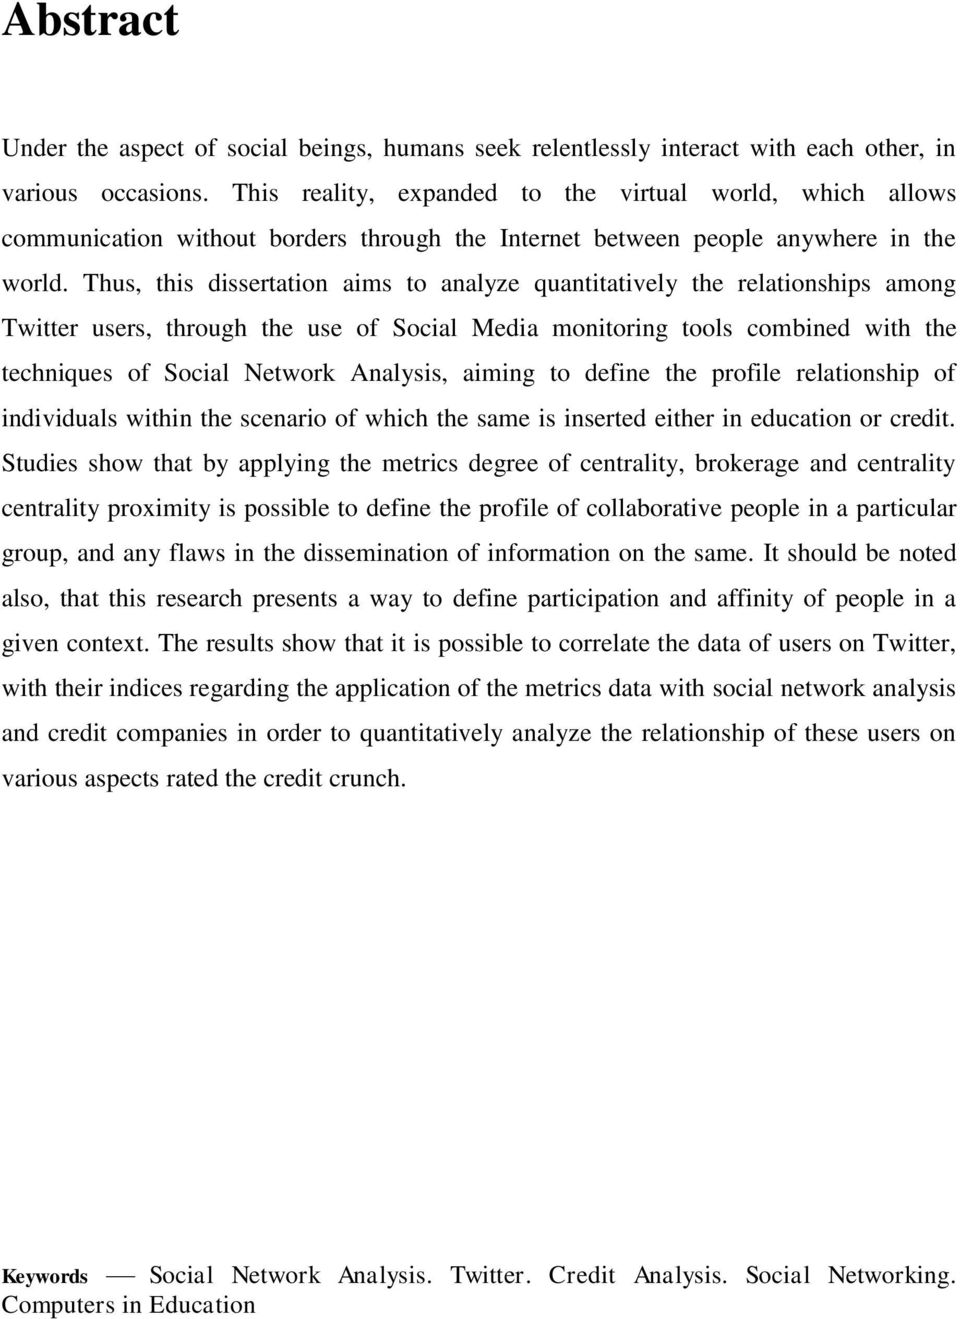 Thus, this dissertation aims to analyze quantitatively the relationships among Twitter users, through the use of Social Media monitoring tools combined with the techniques of Social Network Analysis,